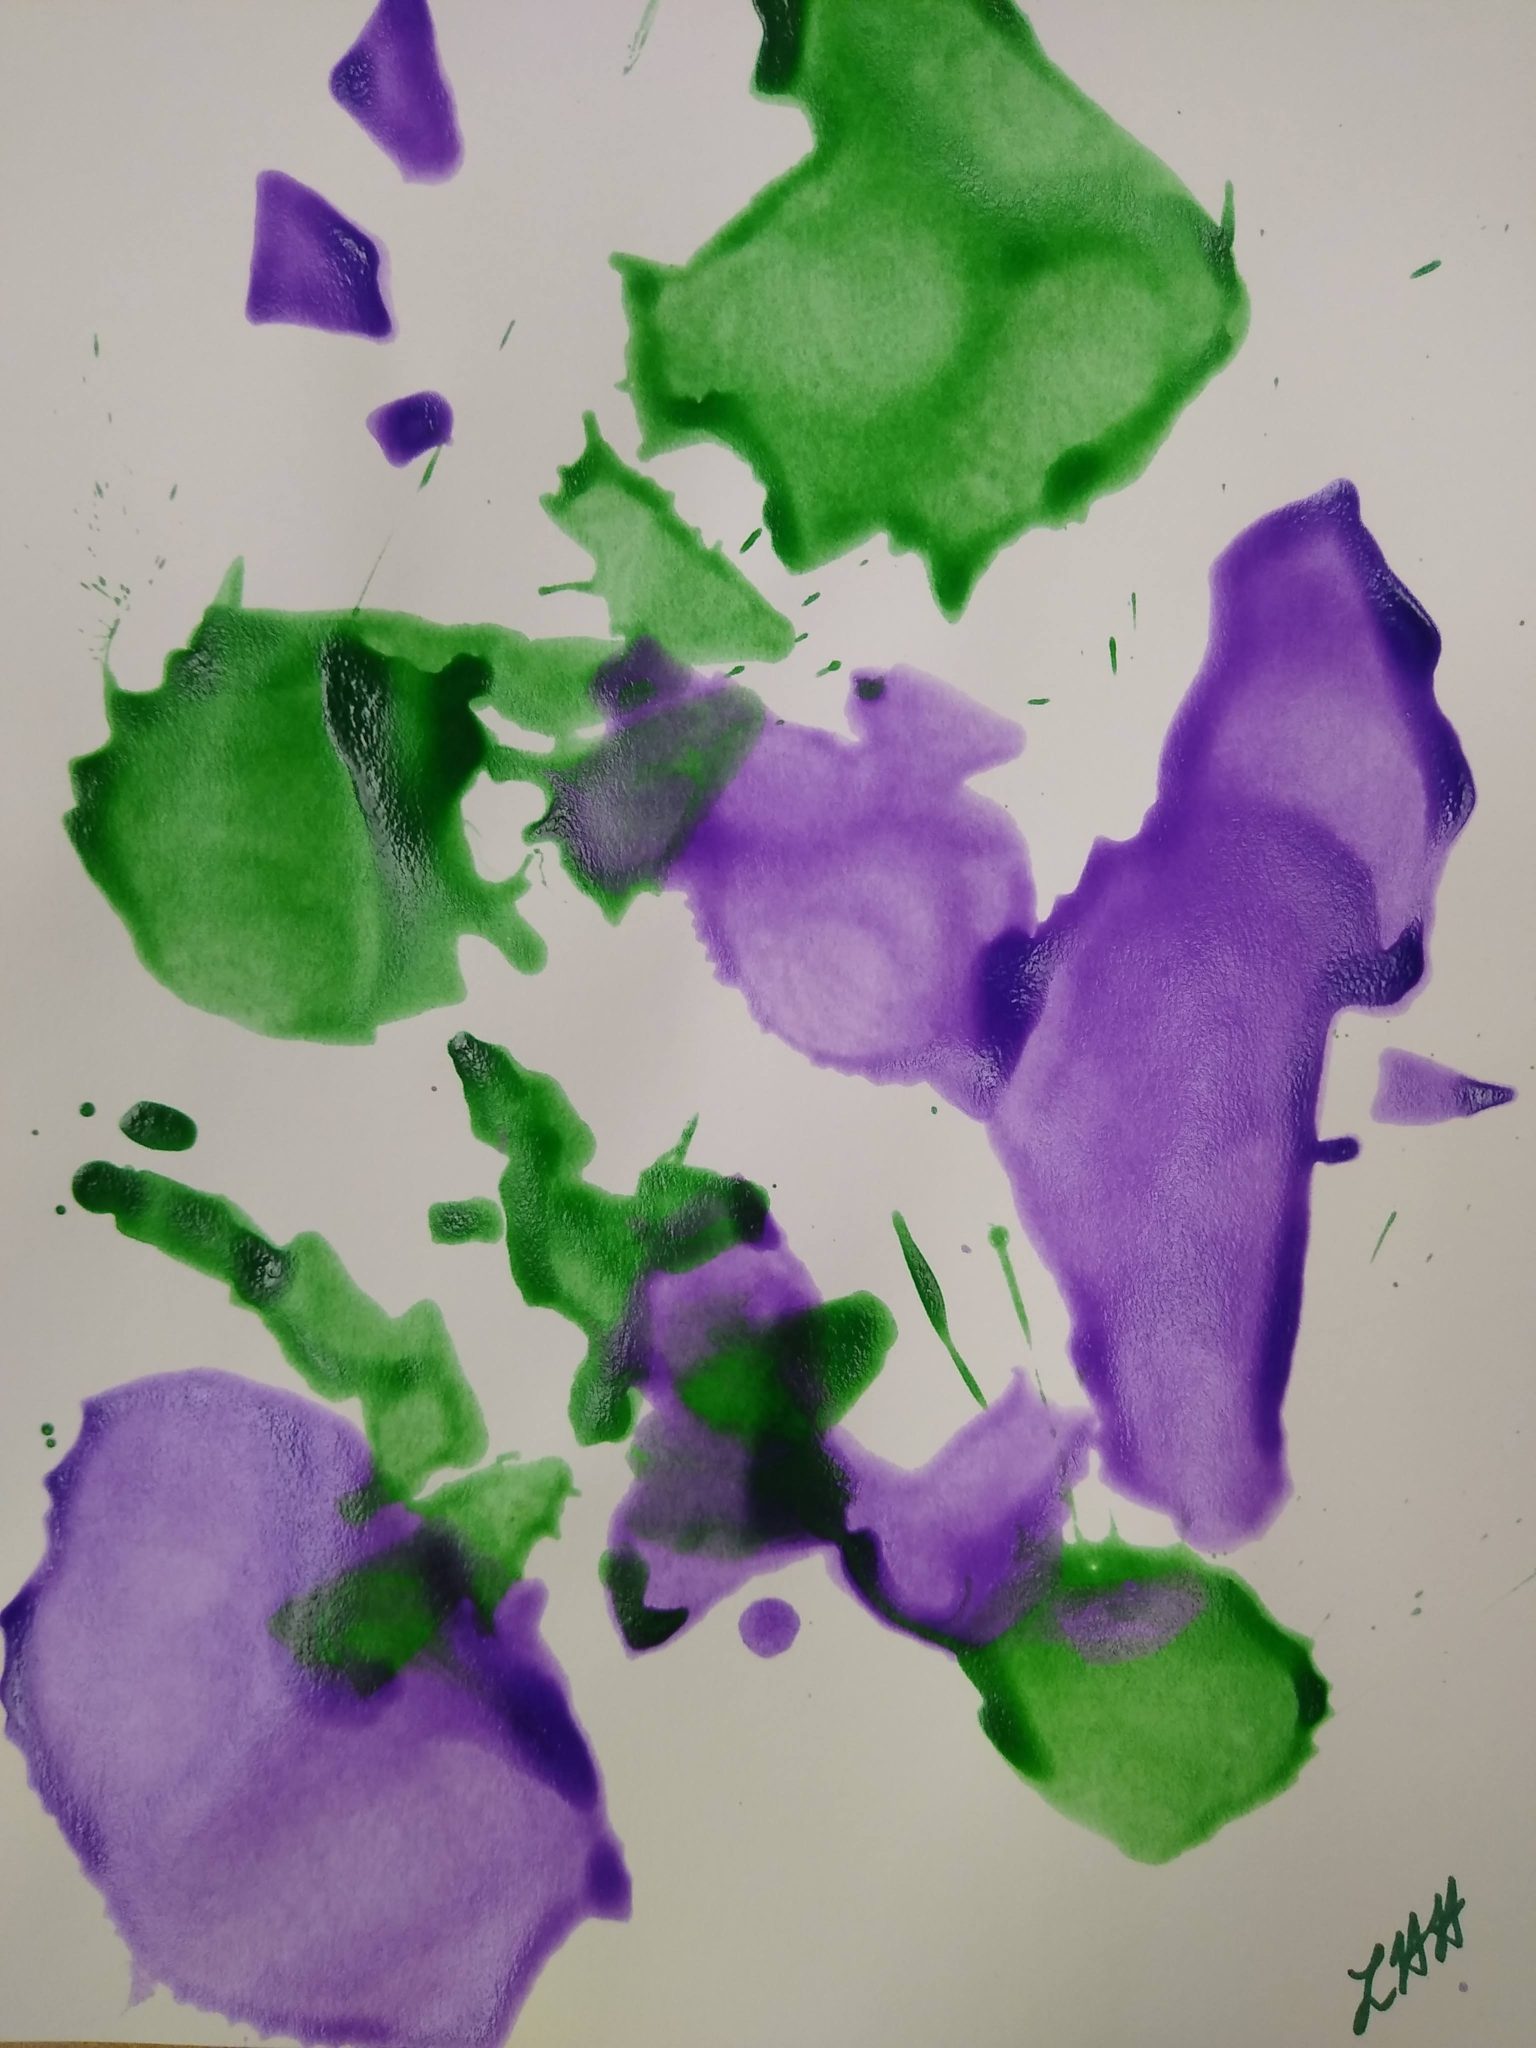 Looking down at a straw pointed at purple and green paint splotches on paper.